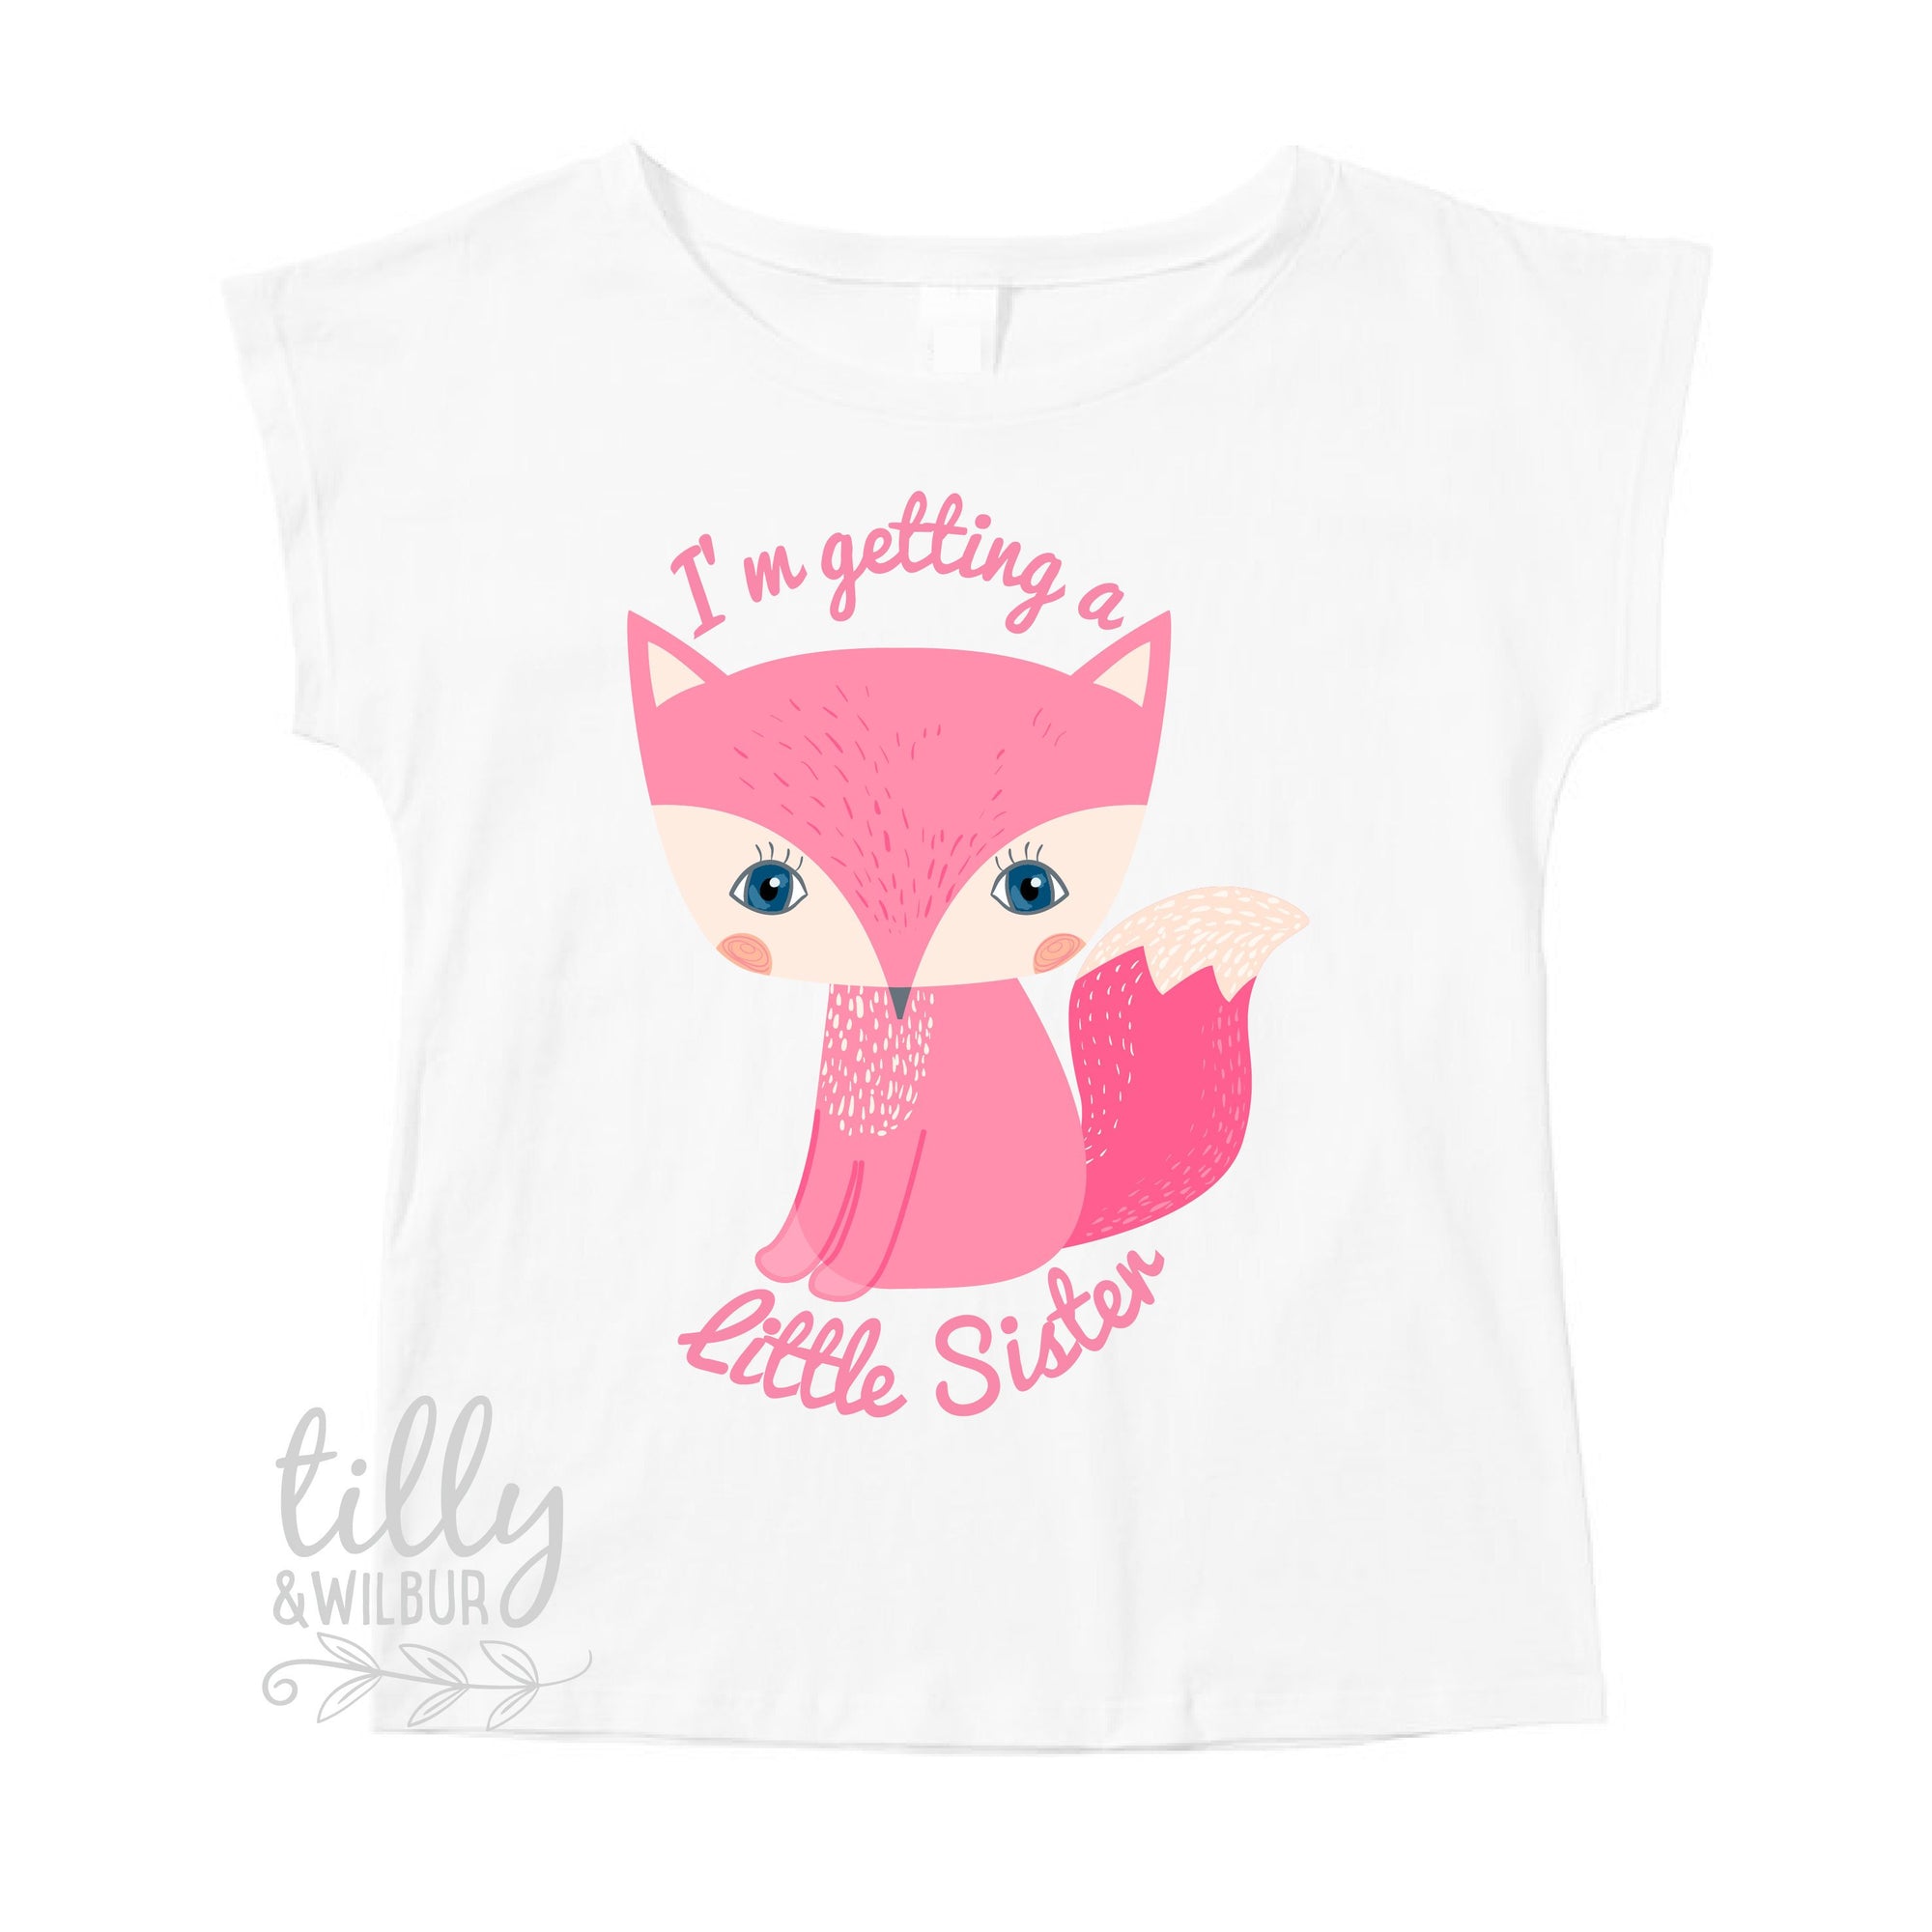 Big Sister Girls T-Shirt, I'm Getting A Little Sister Pregnancy Announcement T-Shirt, I'm Going To Be A Big Sister, Fox, Woodland, Pink